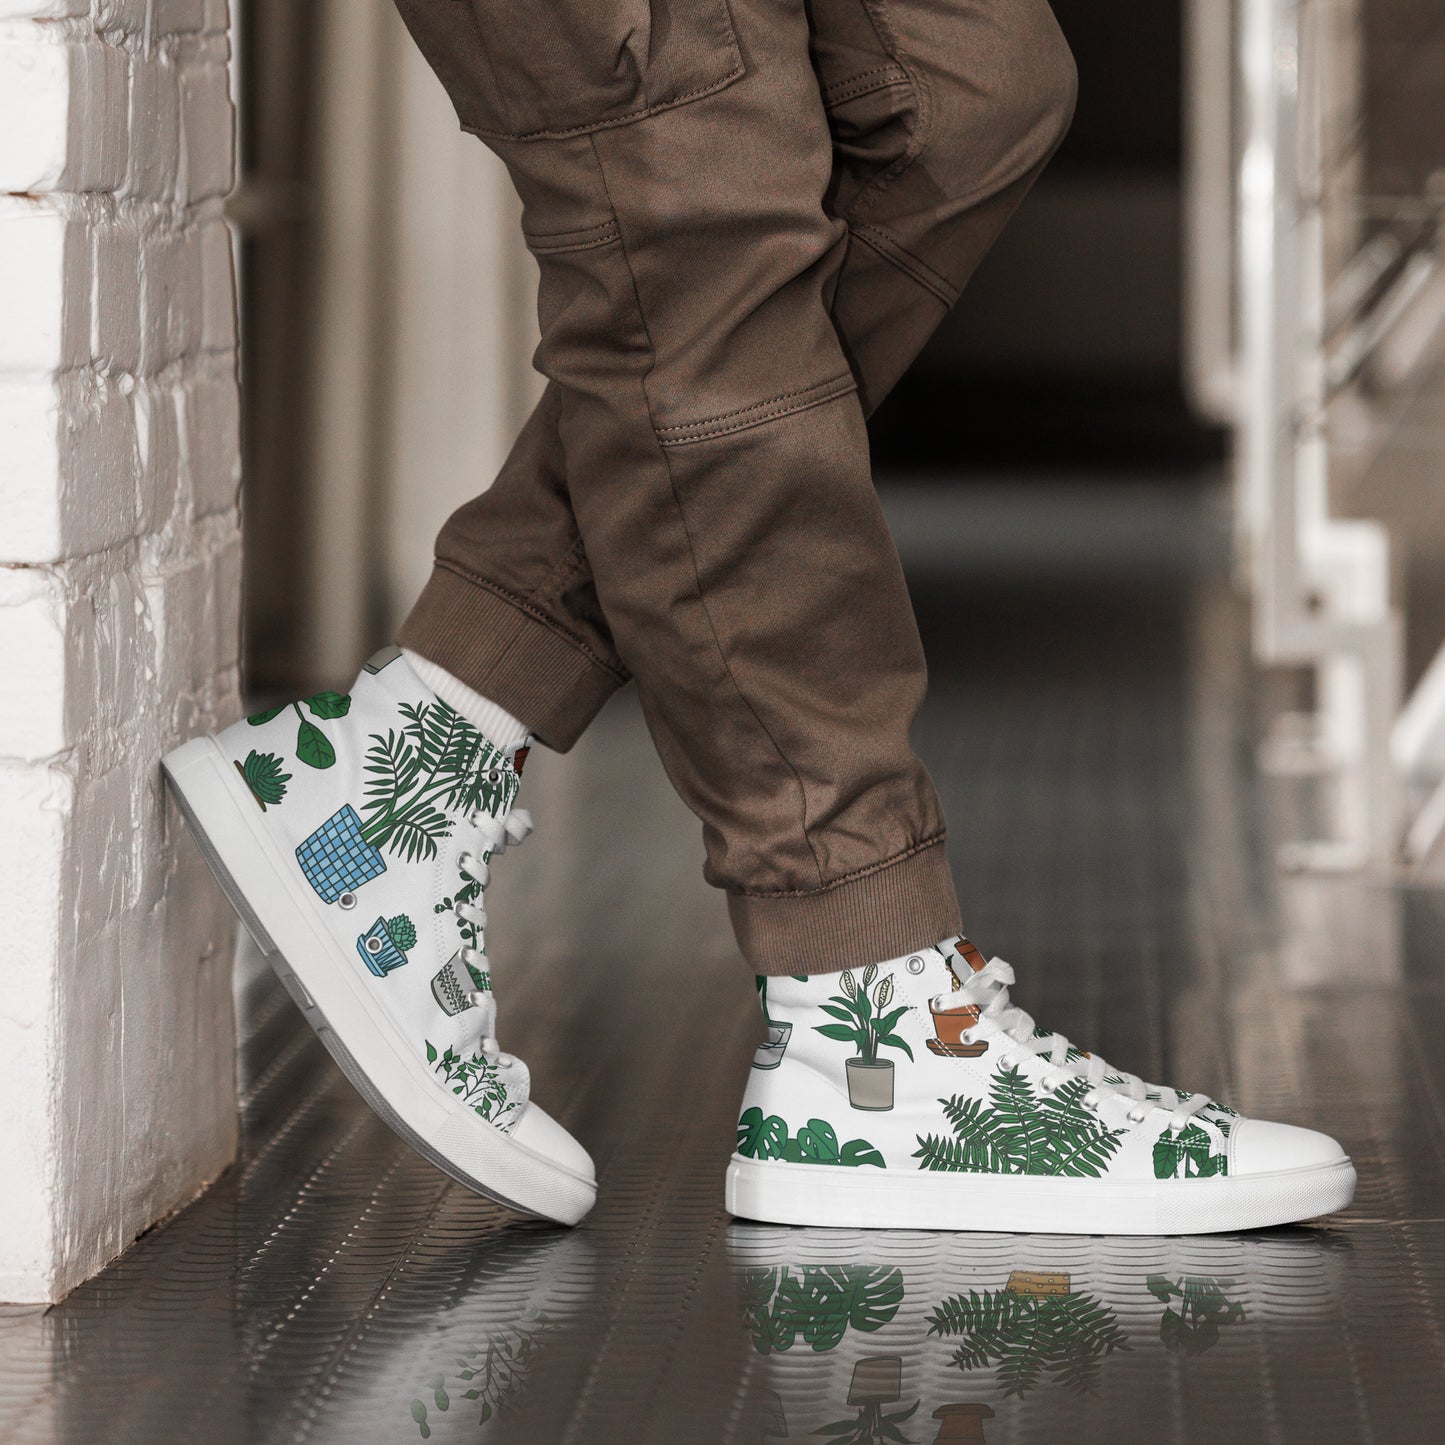 Plant Lover - Men’s high top canvas shoes Mens High Top Shoes